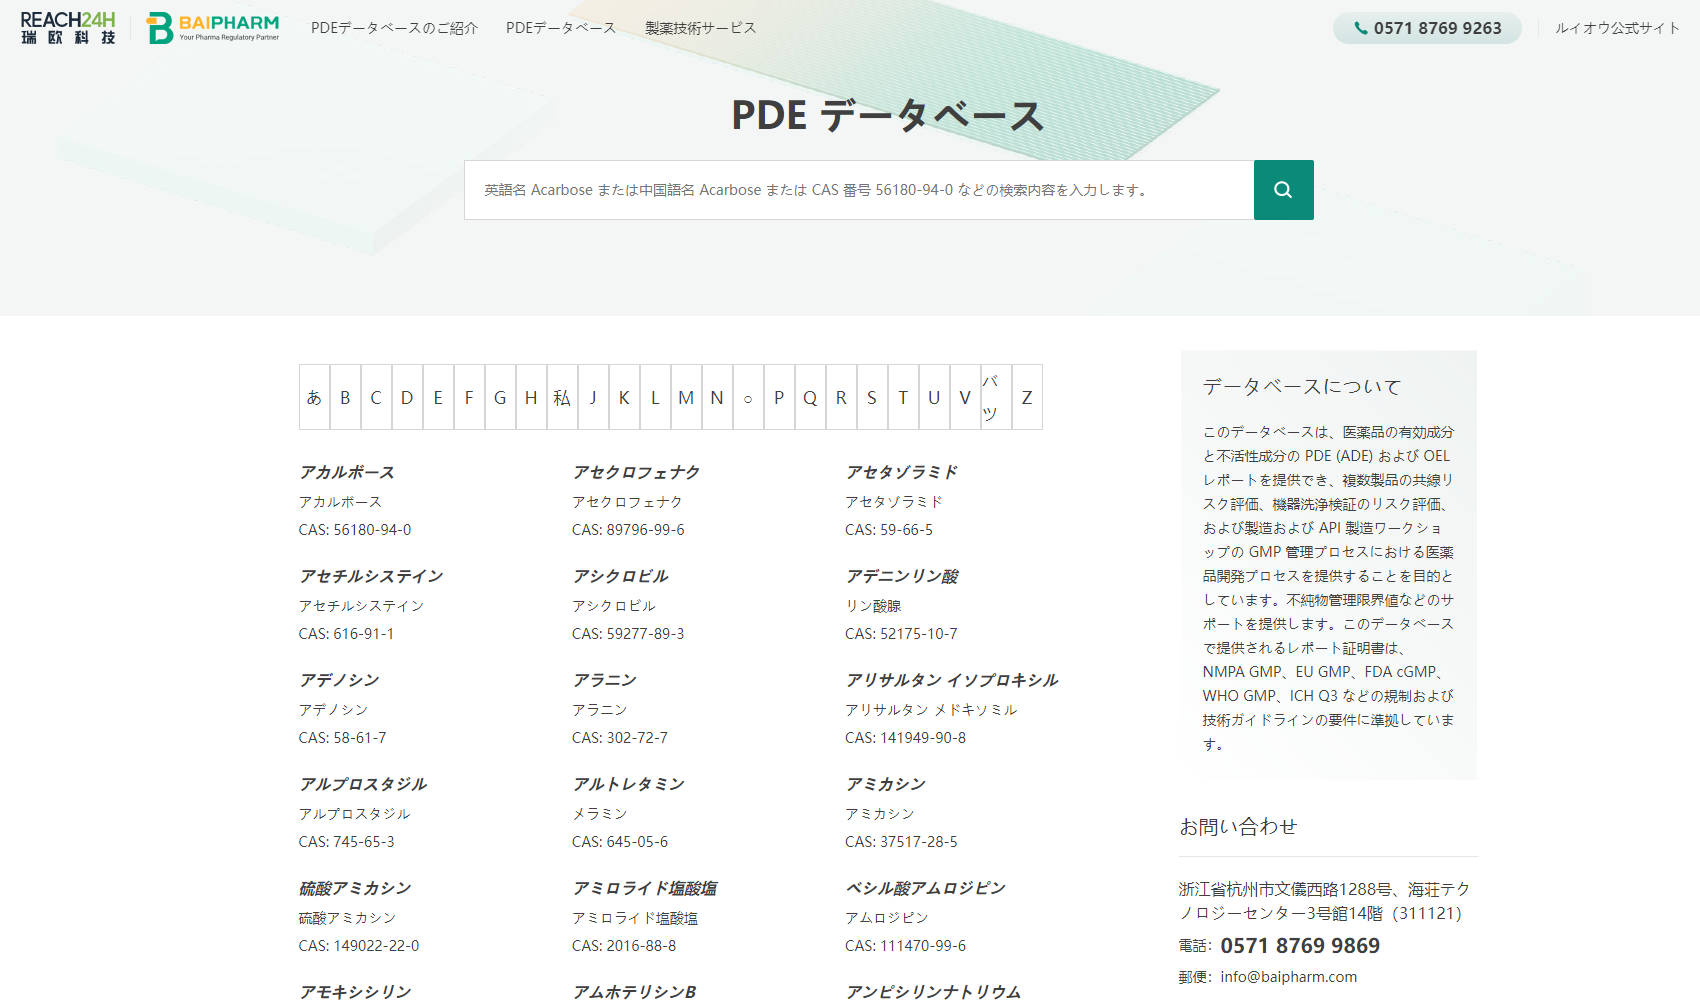 articles/baipharm-pde-database.png